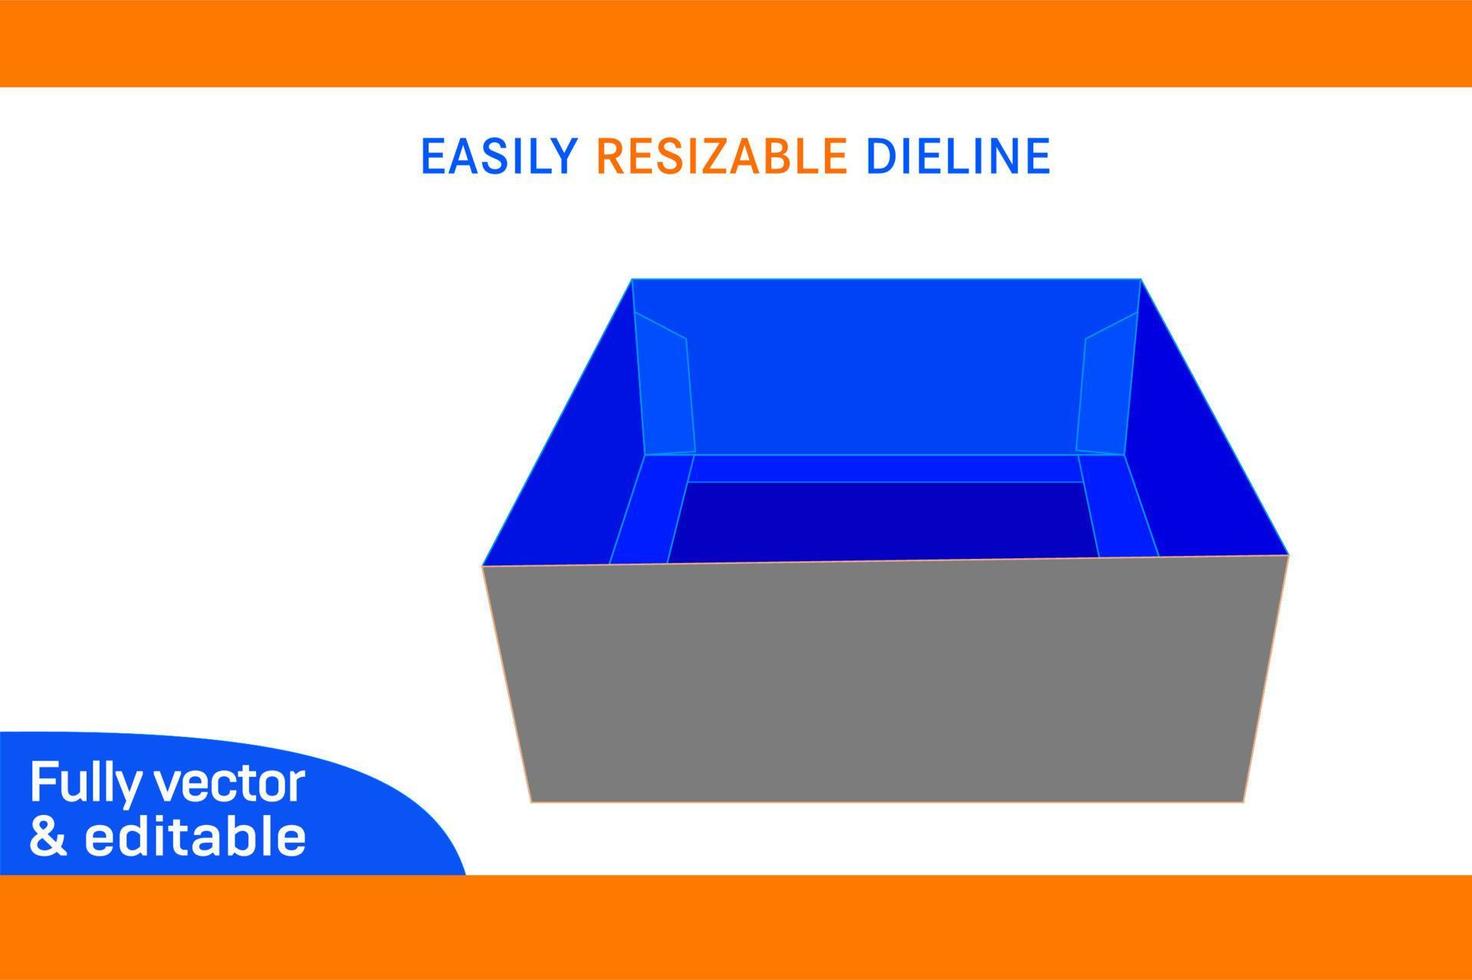 Trays Box, Standard kwikset tray box with reinforcing tabs dieline template and 3D box design 3D box vector